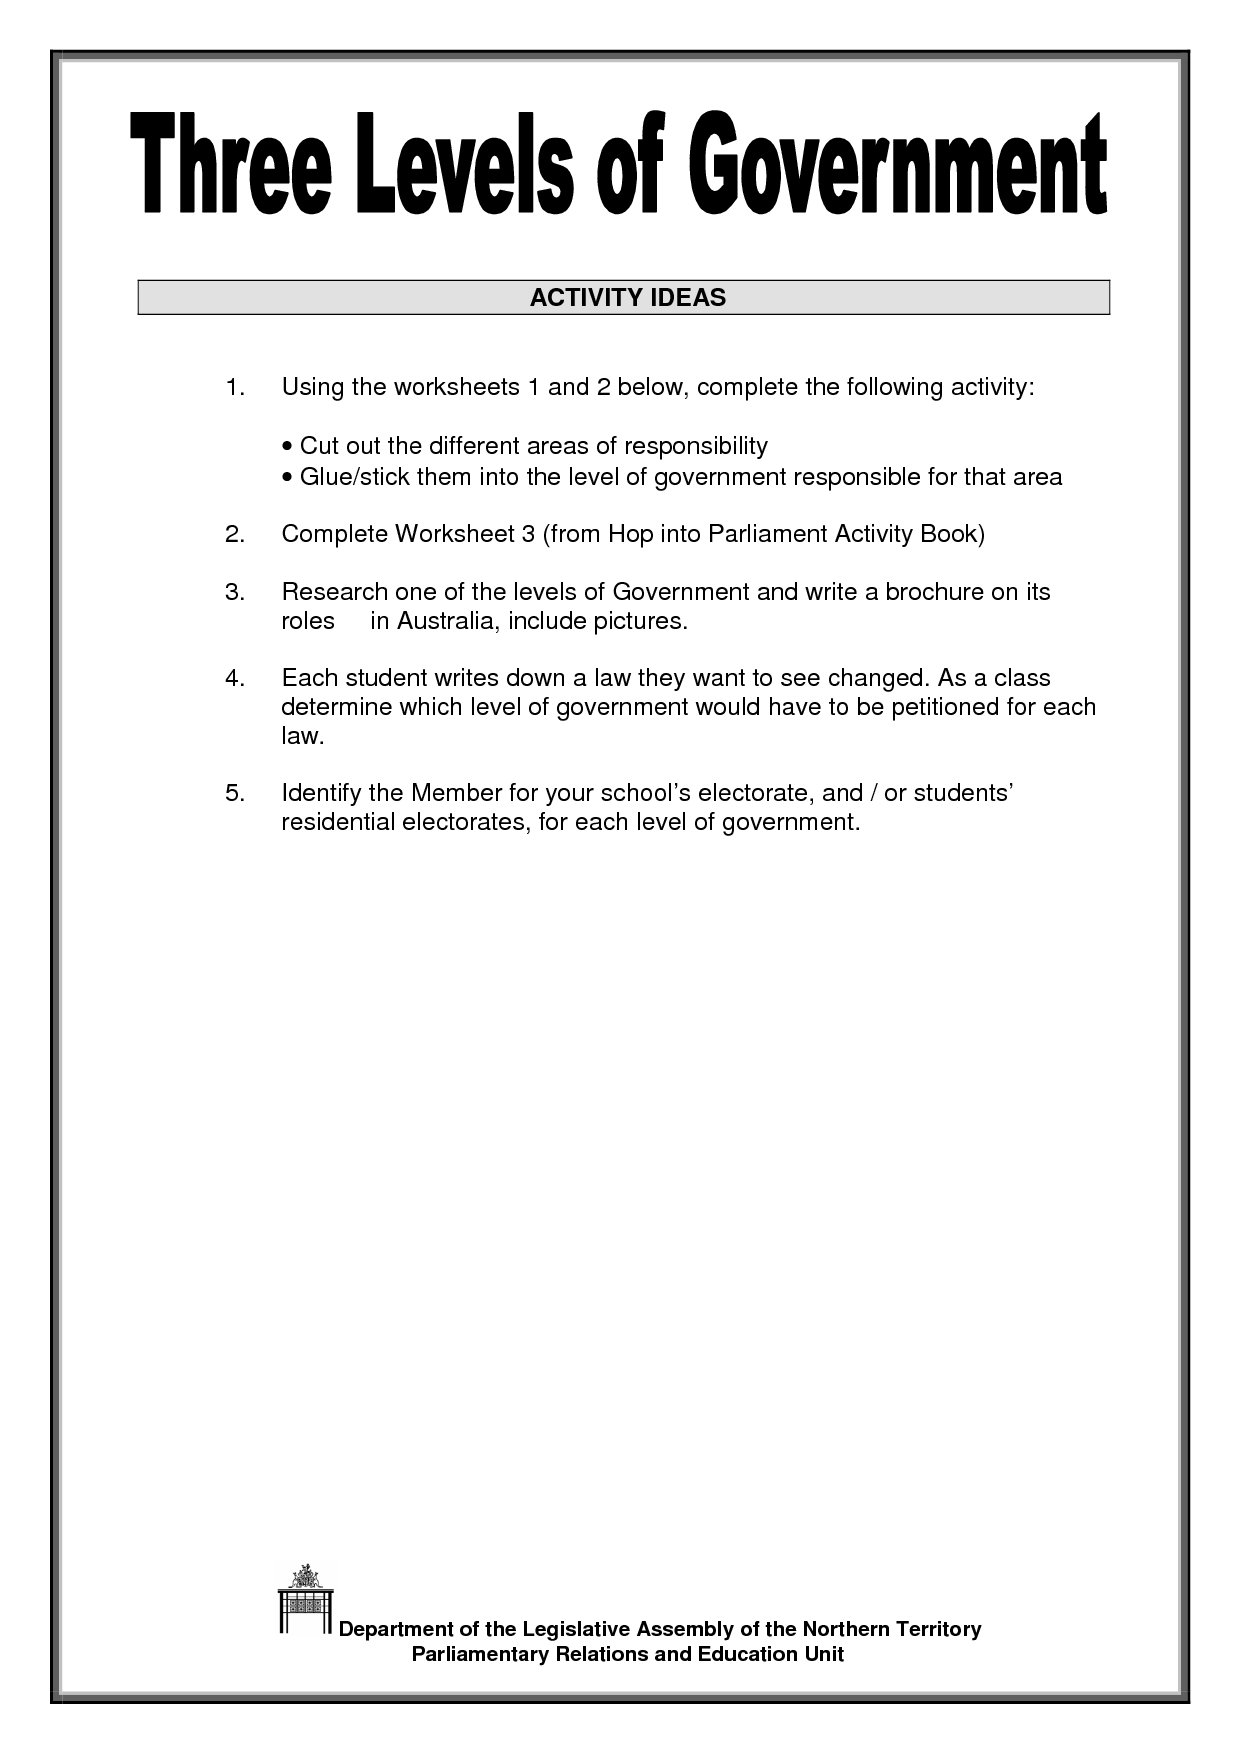 15-best-images-of-different-types-of-government-worksheet-different